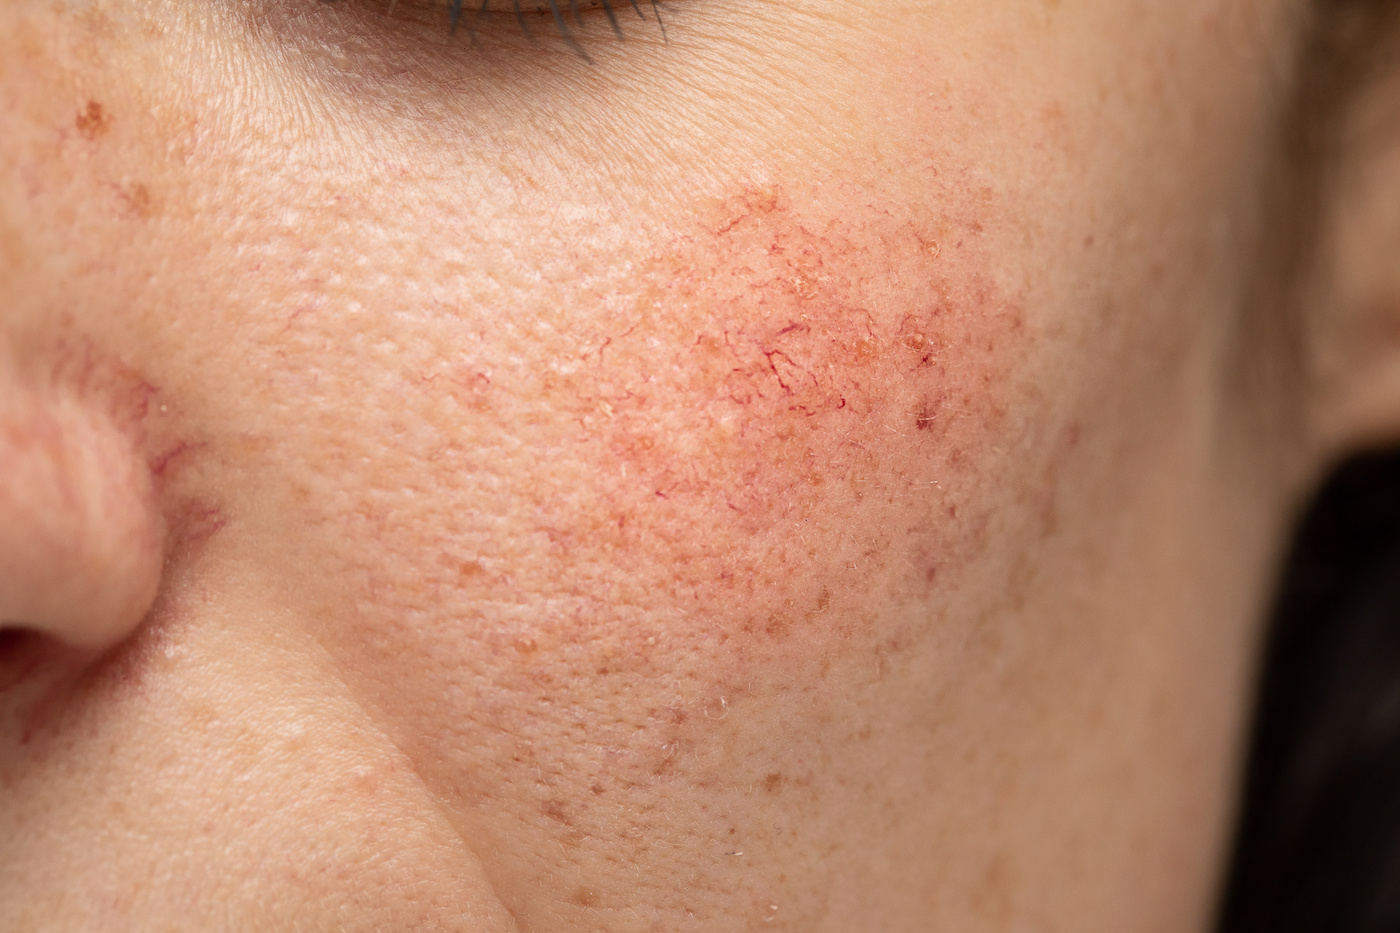 Detailed close-up of red cheeks with visible signs of rosacea, highlighting the textured skin condition that necessitates a focused approach to managing rosacea symptoms.